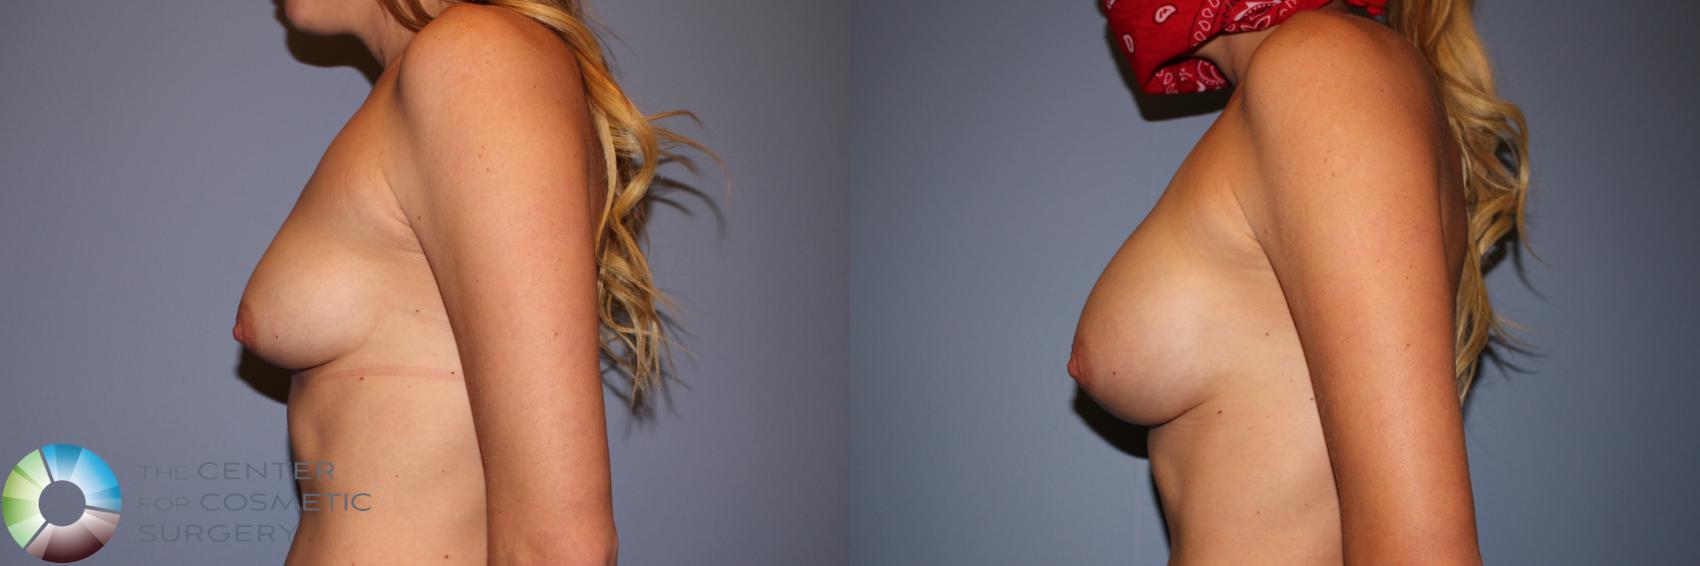 Before & After Breast Augmentation Case 11576 Left Side View in Golden, CO